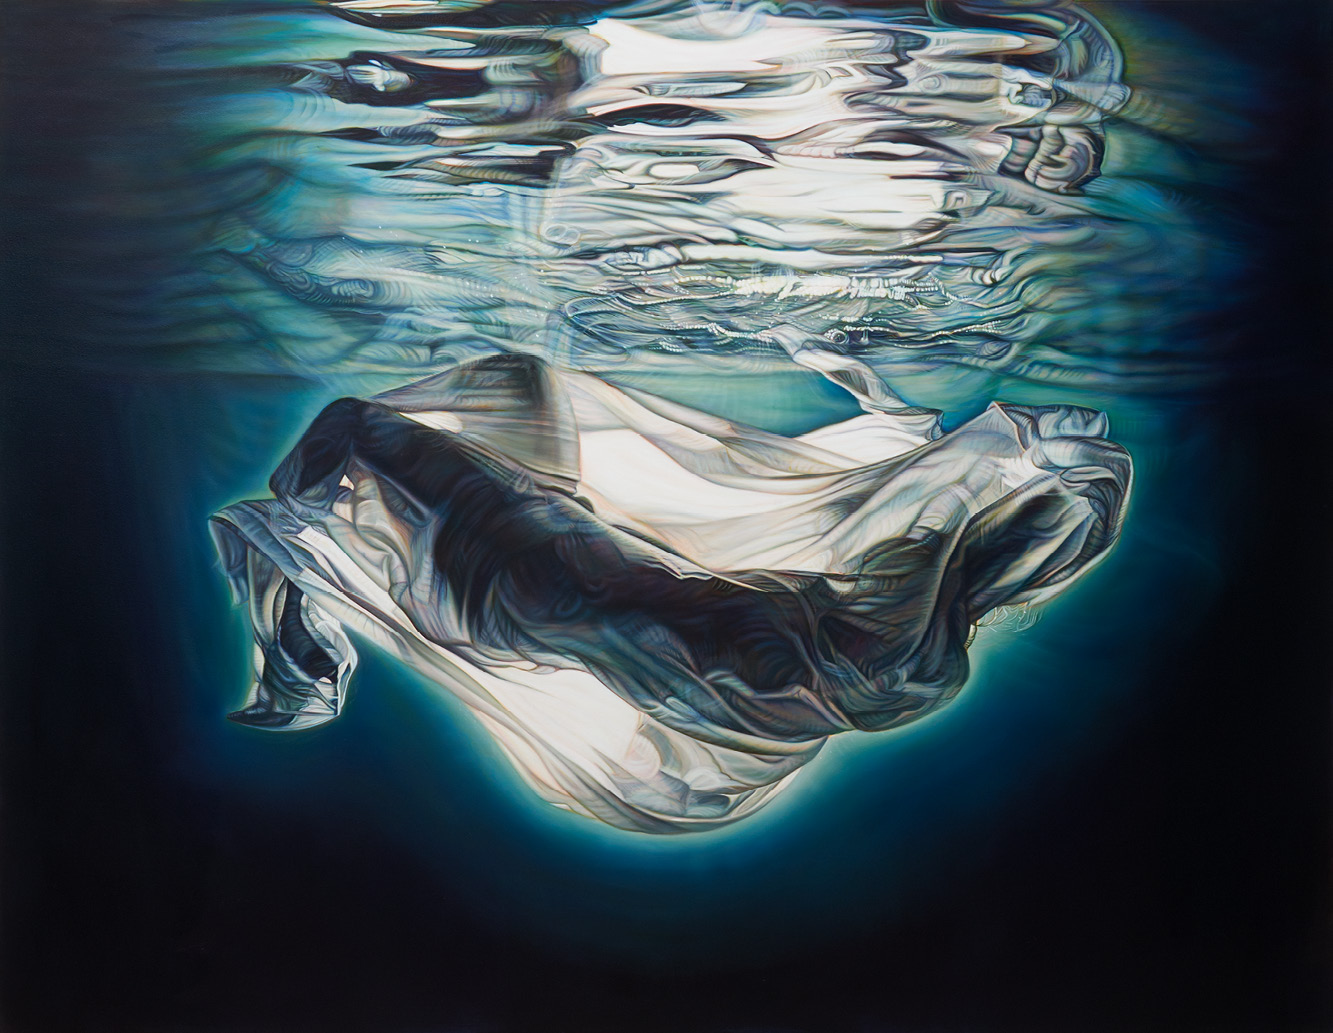 Painting of a person floating in a body of water. The figure is surrounded by a bubbles and white fabric that is lit from the other side. The person is wearing black heals. There is a reflection of the waters surface above the figure.